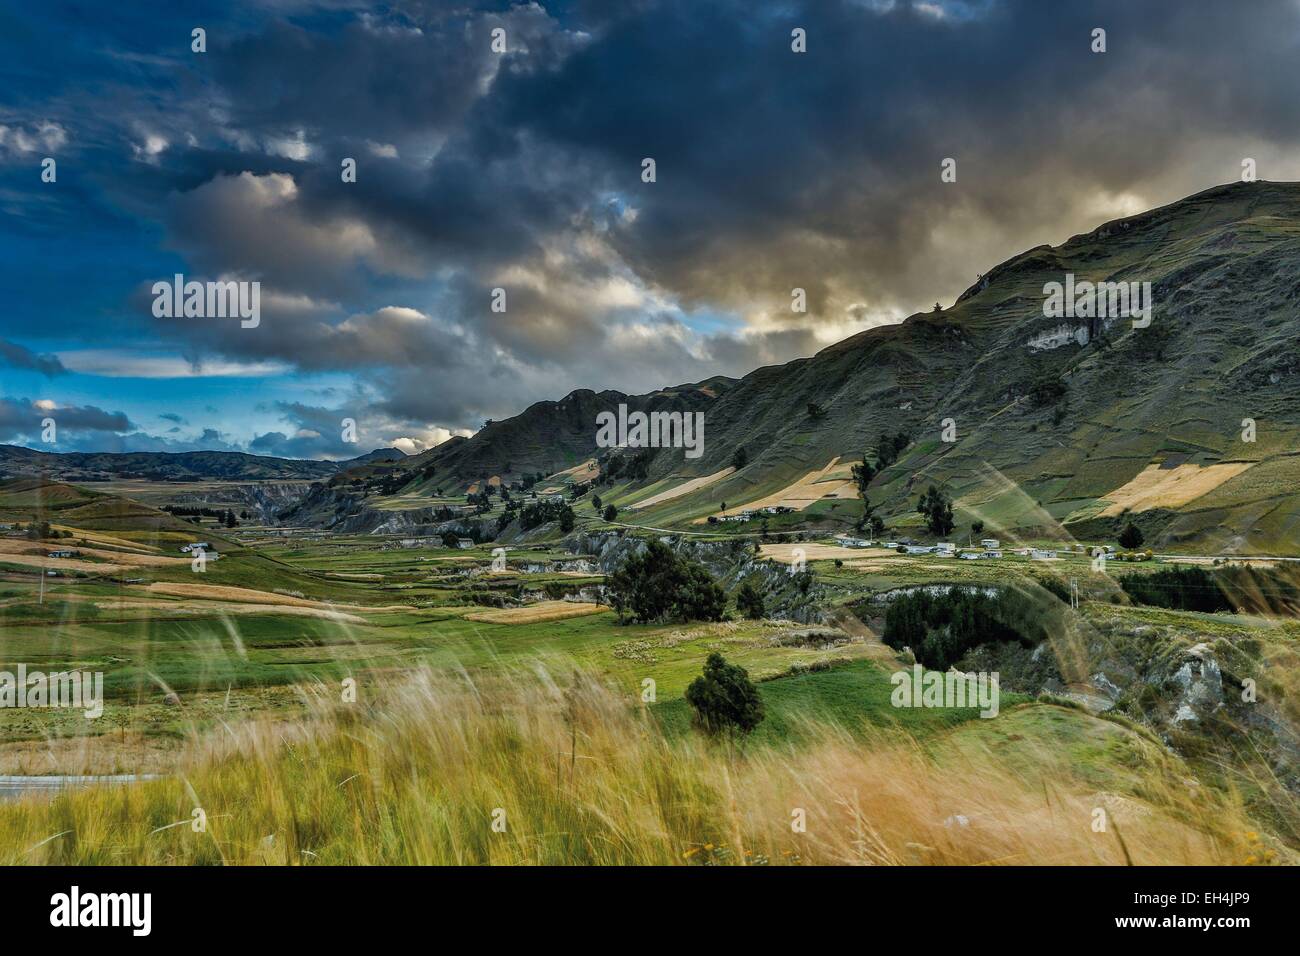 Ecuador, Cotopaxi, Zumbahua, mountainous Andean landscape of plains and canyons under a cloudy sky at sunrise Stock Photo